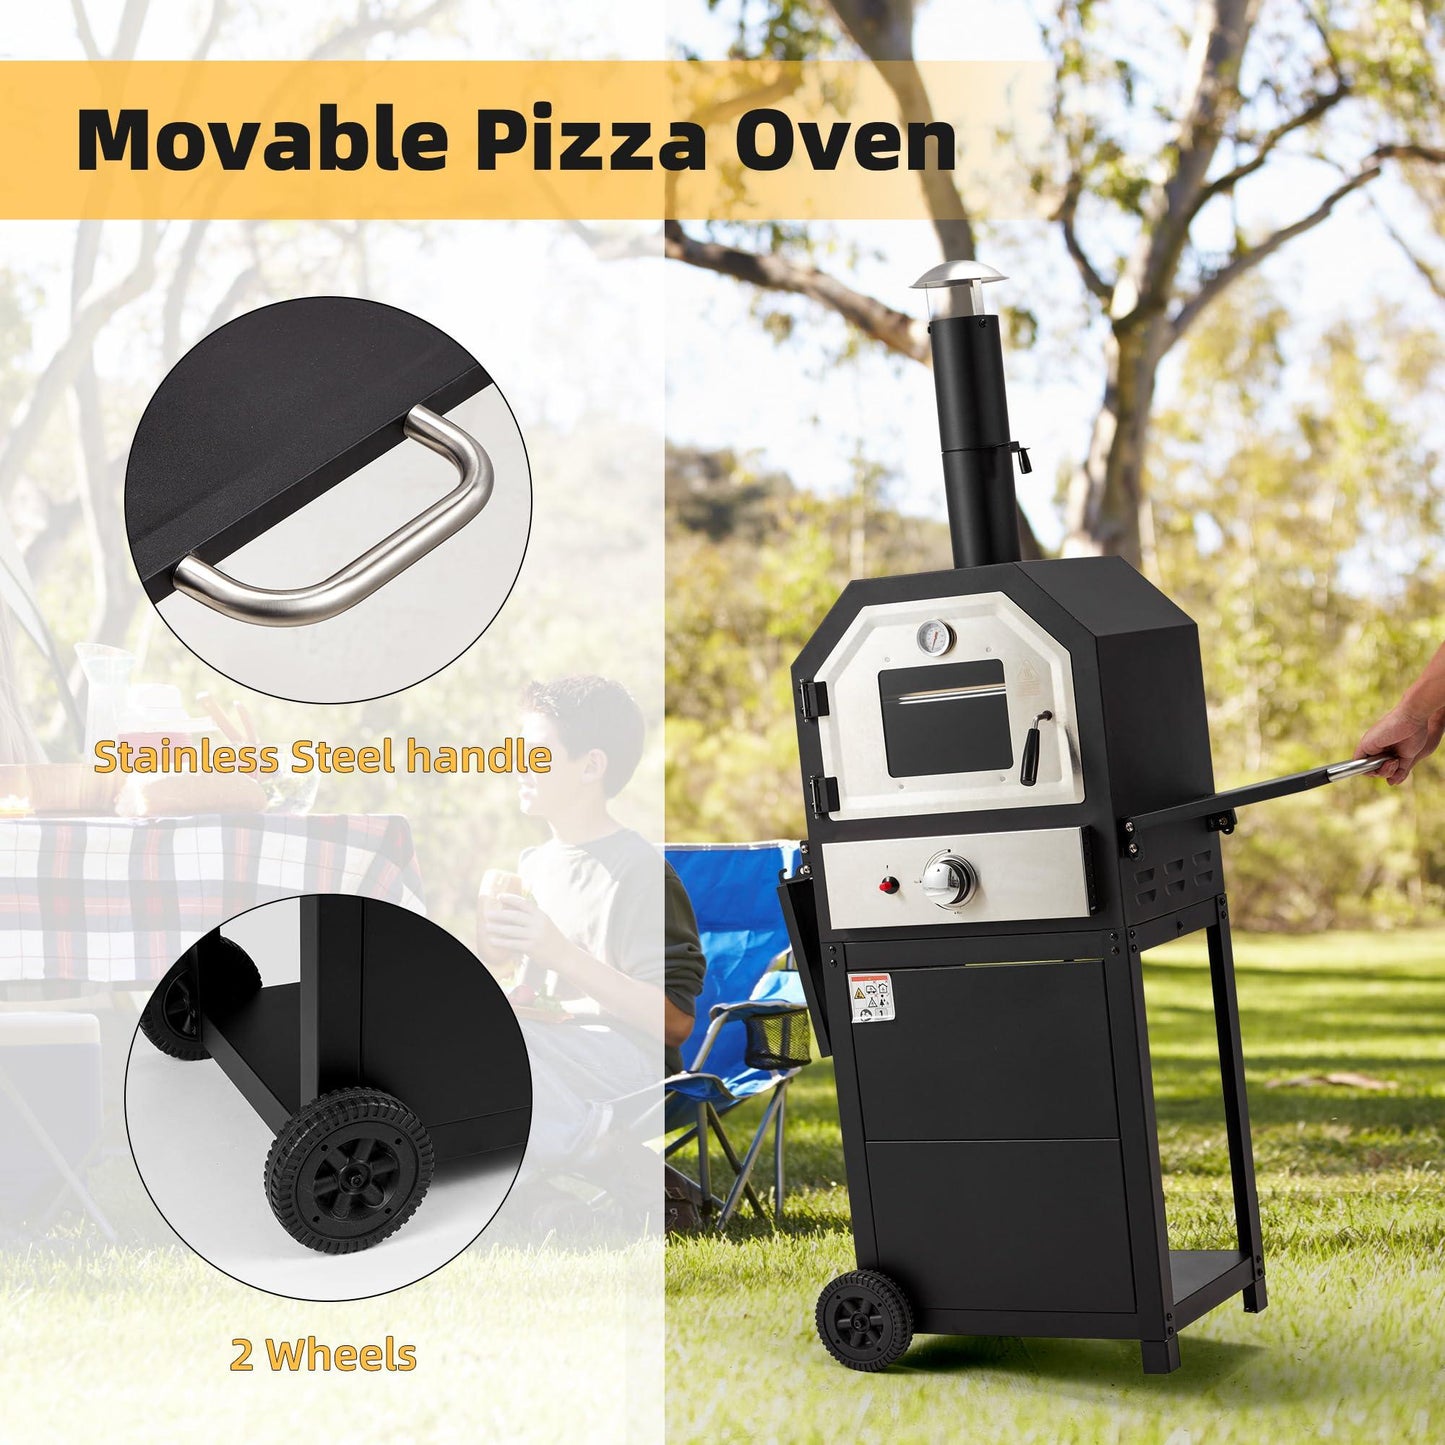 Vicluke 12" Outdoor Pizza Oven, Gas Pizza Oven CSA Approved, Portable Propane Pizza Oven, 2-Layer Smokeless BBQ Oven with Wheels, Foldable Shelf with Handle for Outdoor, Camping - CookCave